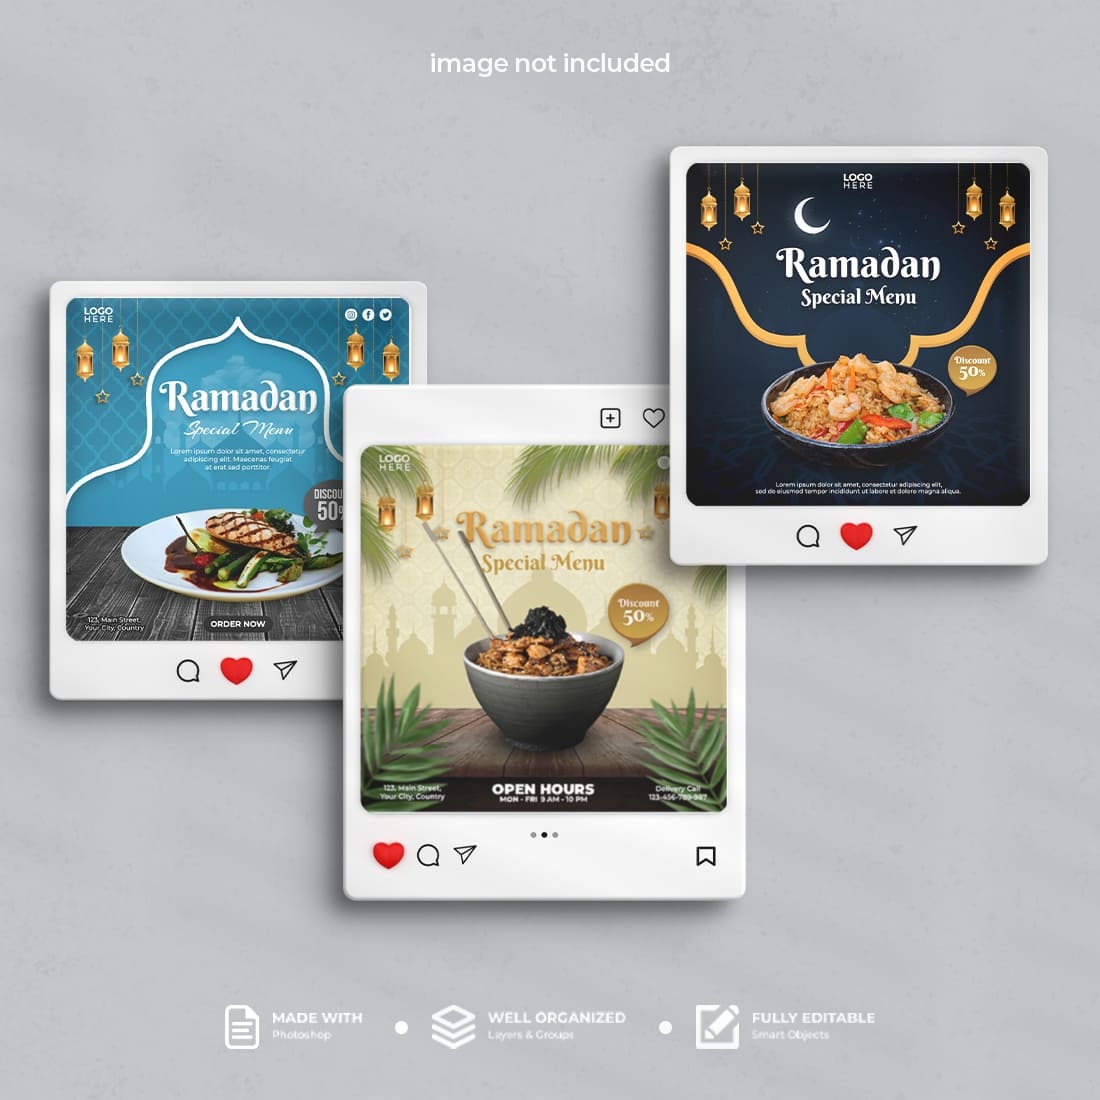 Social Media Post Template Collection For Ramadan Special Menu – Only $6 preview image.